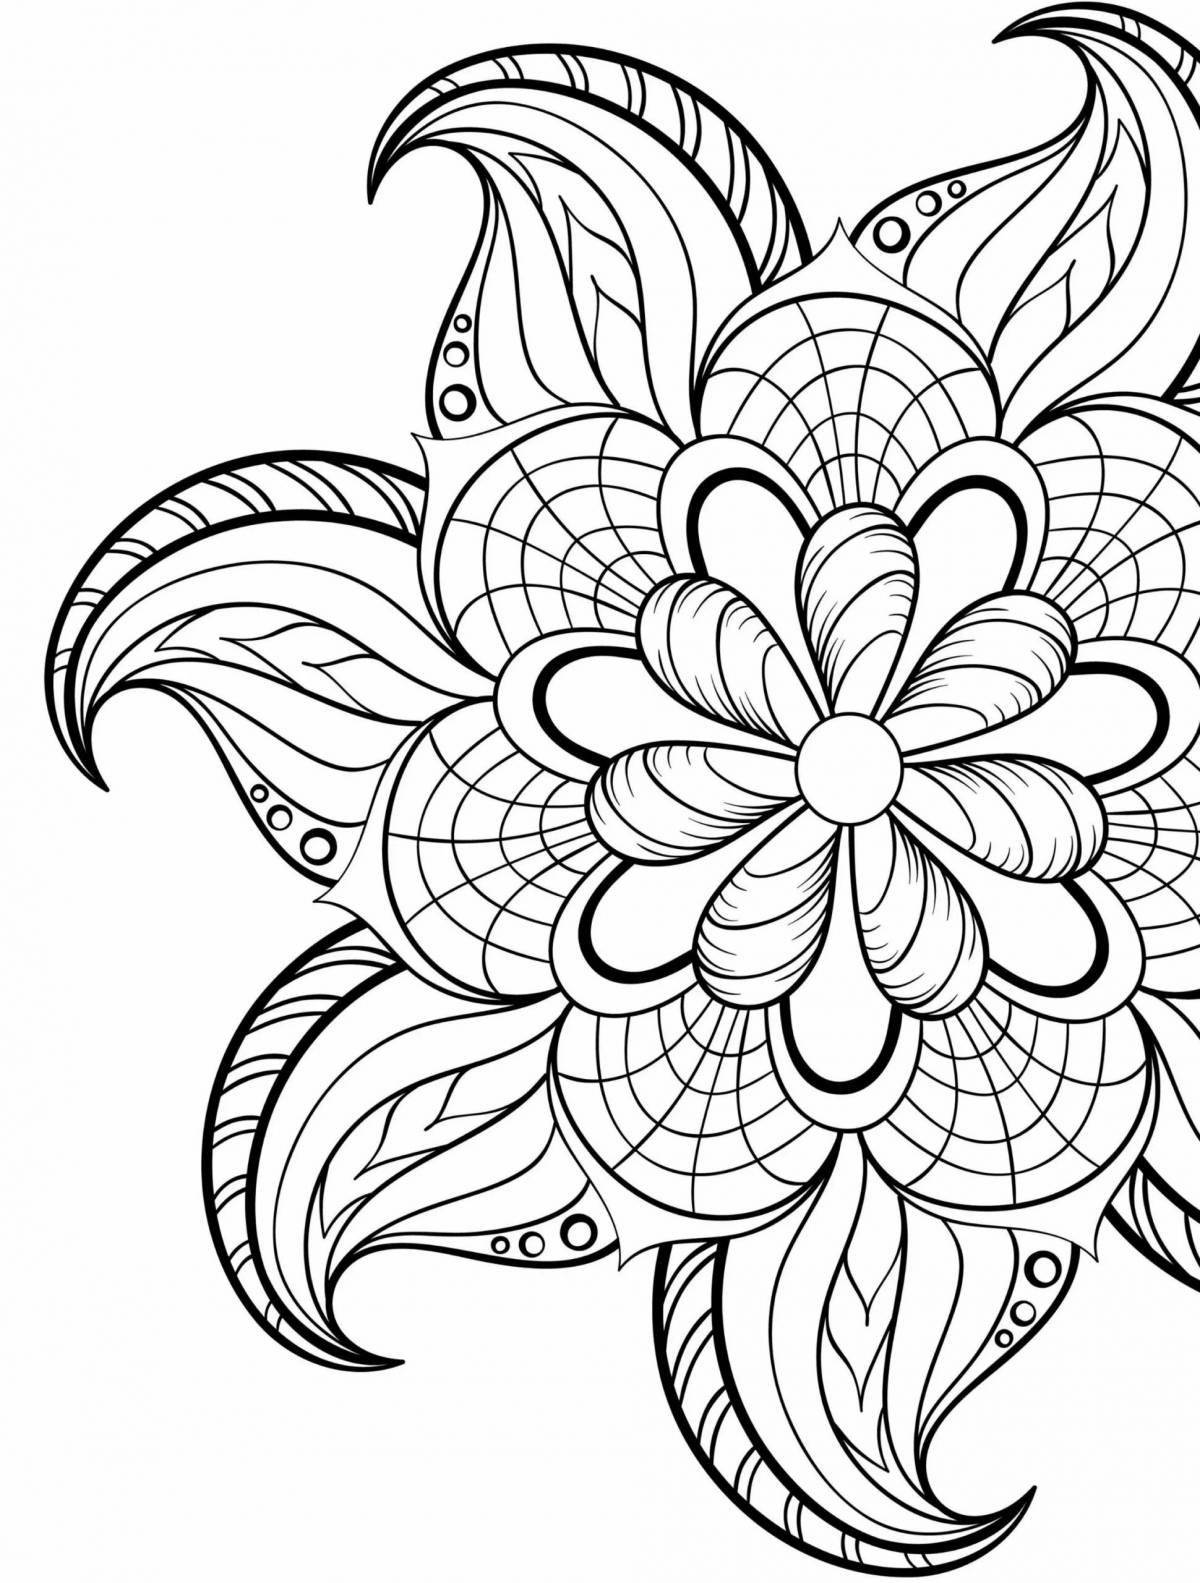 Intricate coloring page